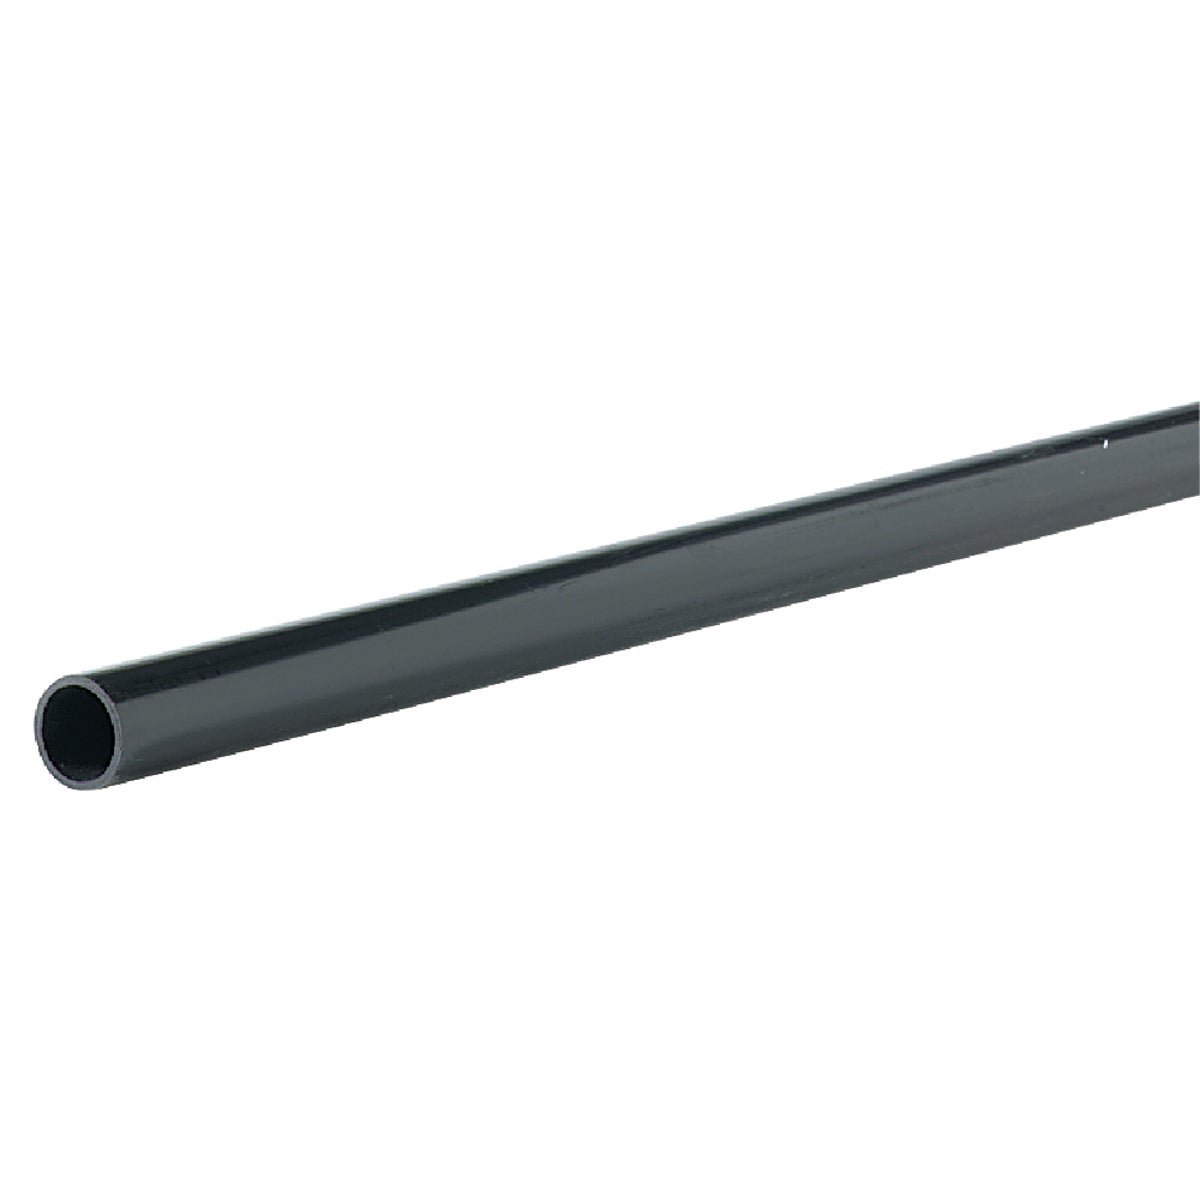 Item 413089, ABS Foam Core pipe is for drain, waste and vent purposes only.